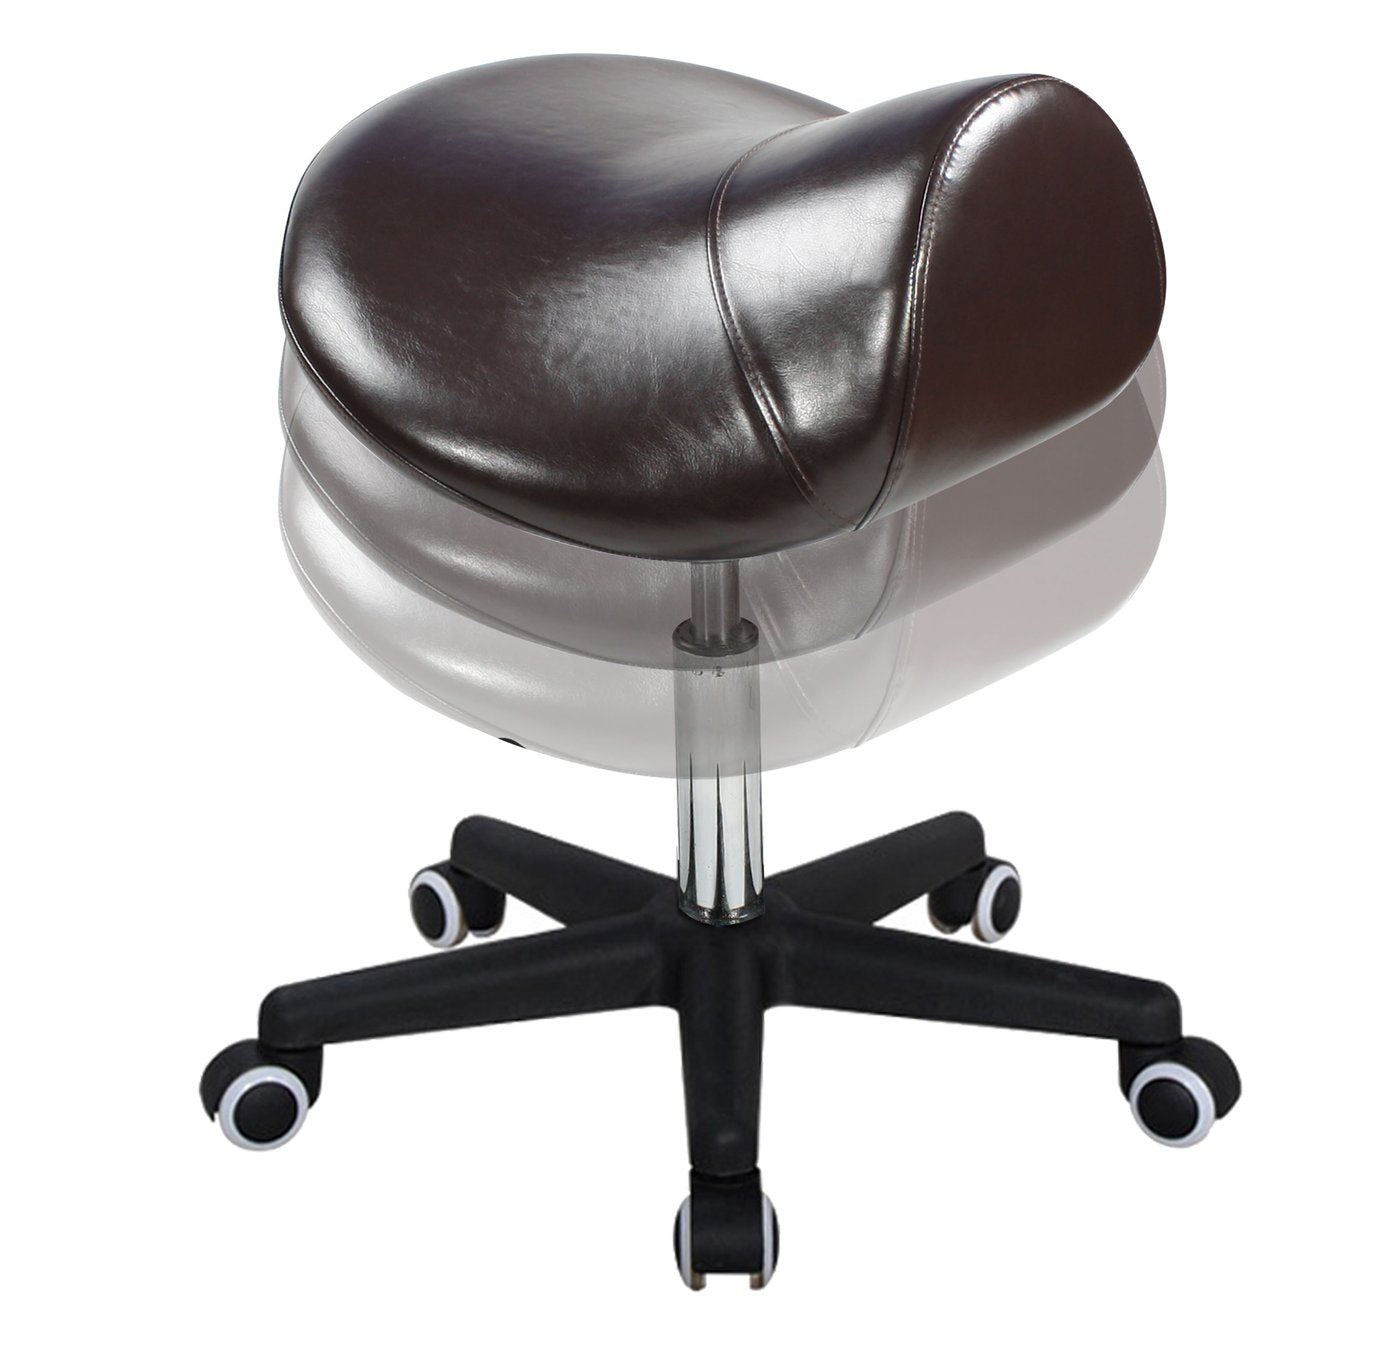 Ergonomic Swivel Saddle Stool, Posture Chair with a Durable Pneumatic Hydraulic Lift